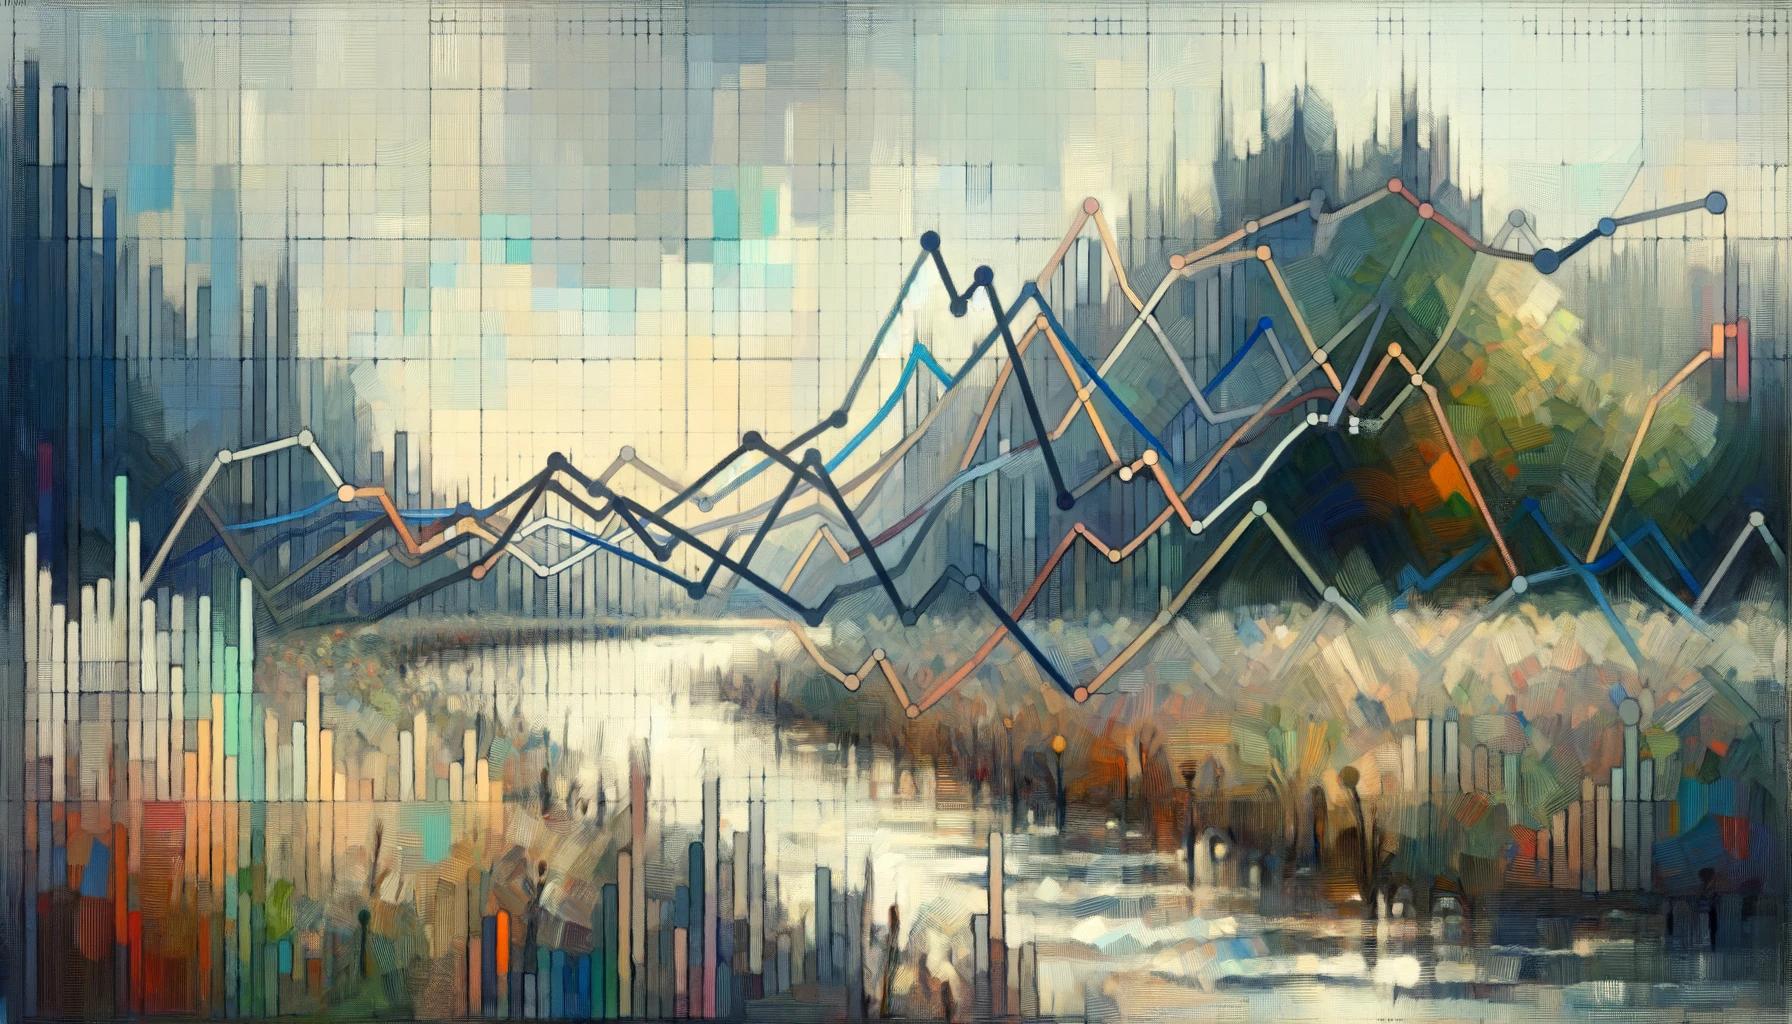 Impressionist-style painting of the transition from winter to spring with abstract confusing graphs.